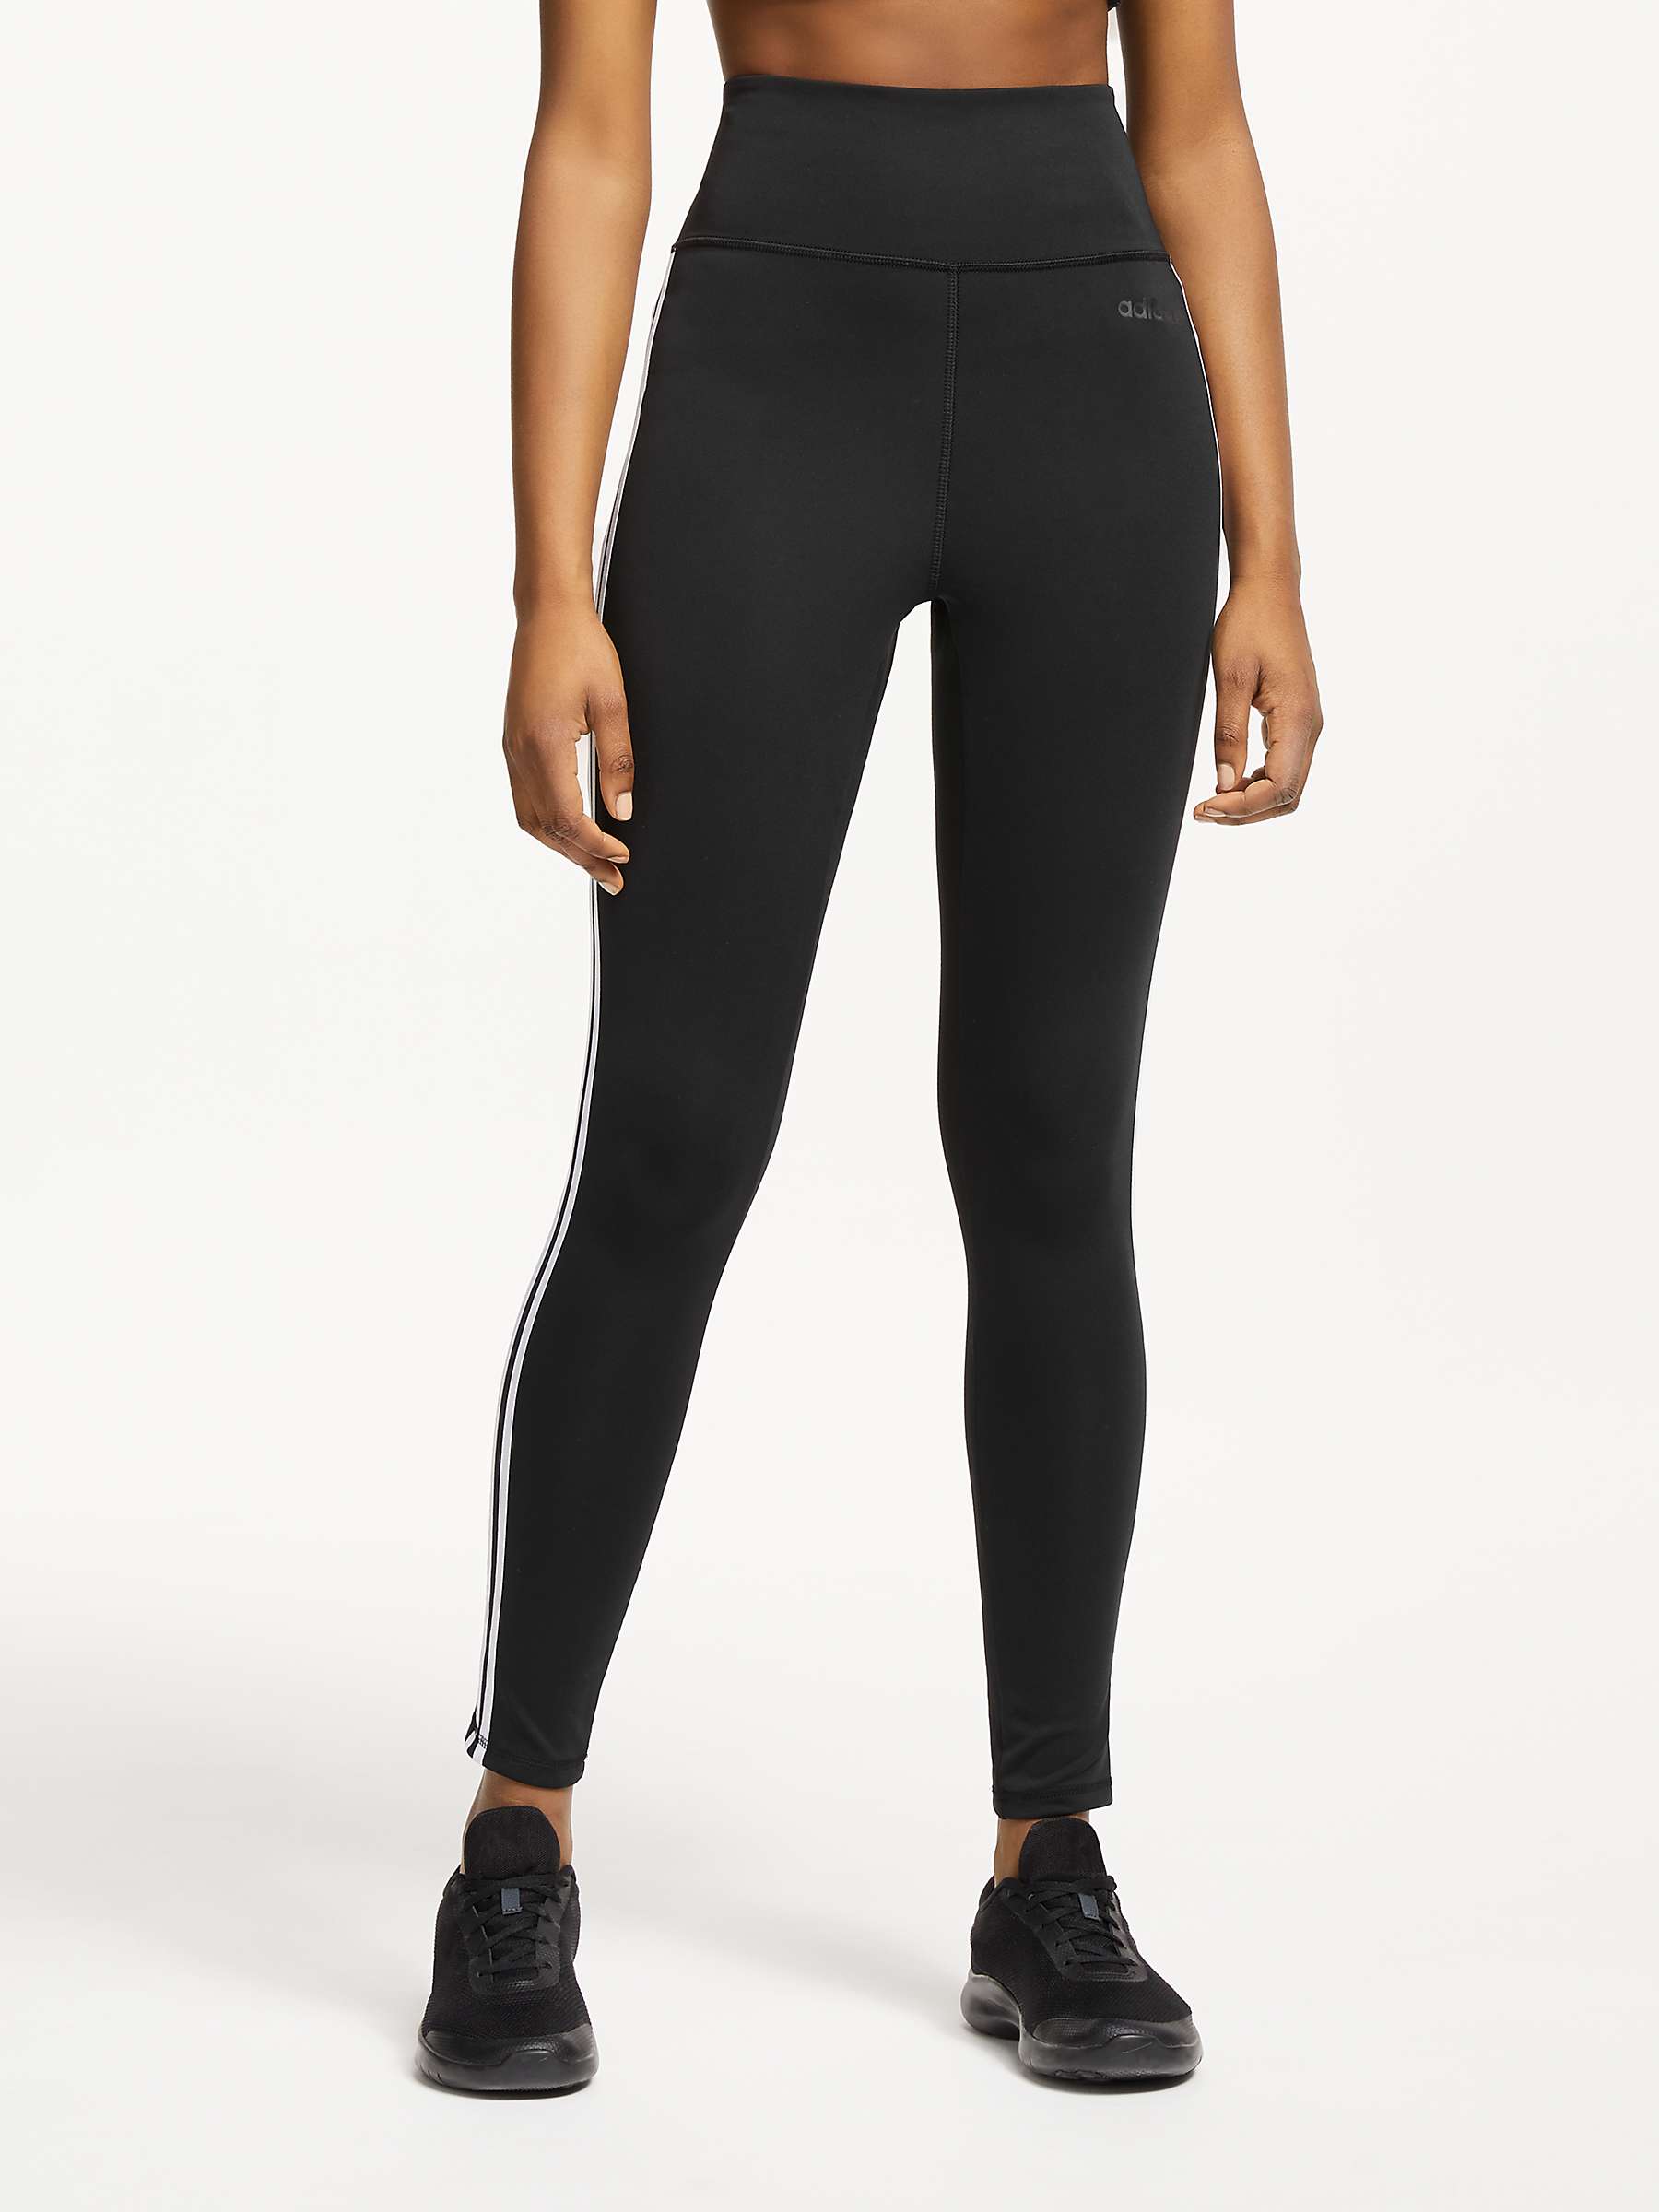 High-waisted gym leggings that will actually stay up during your ...